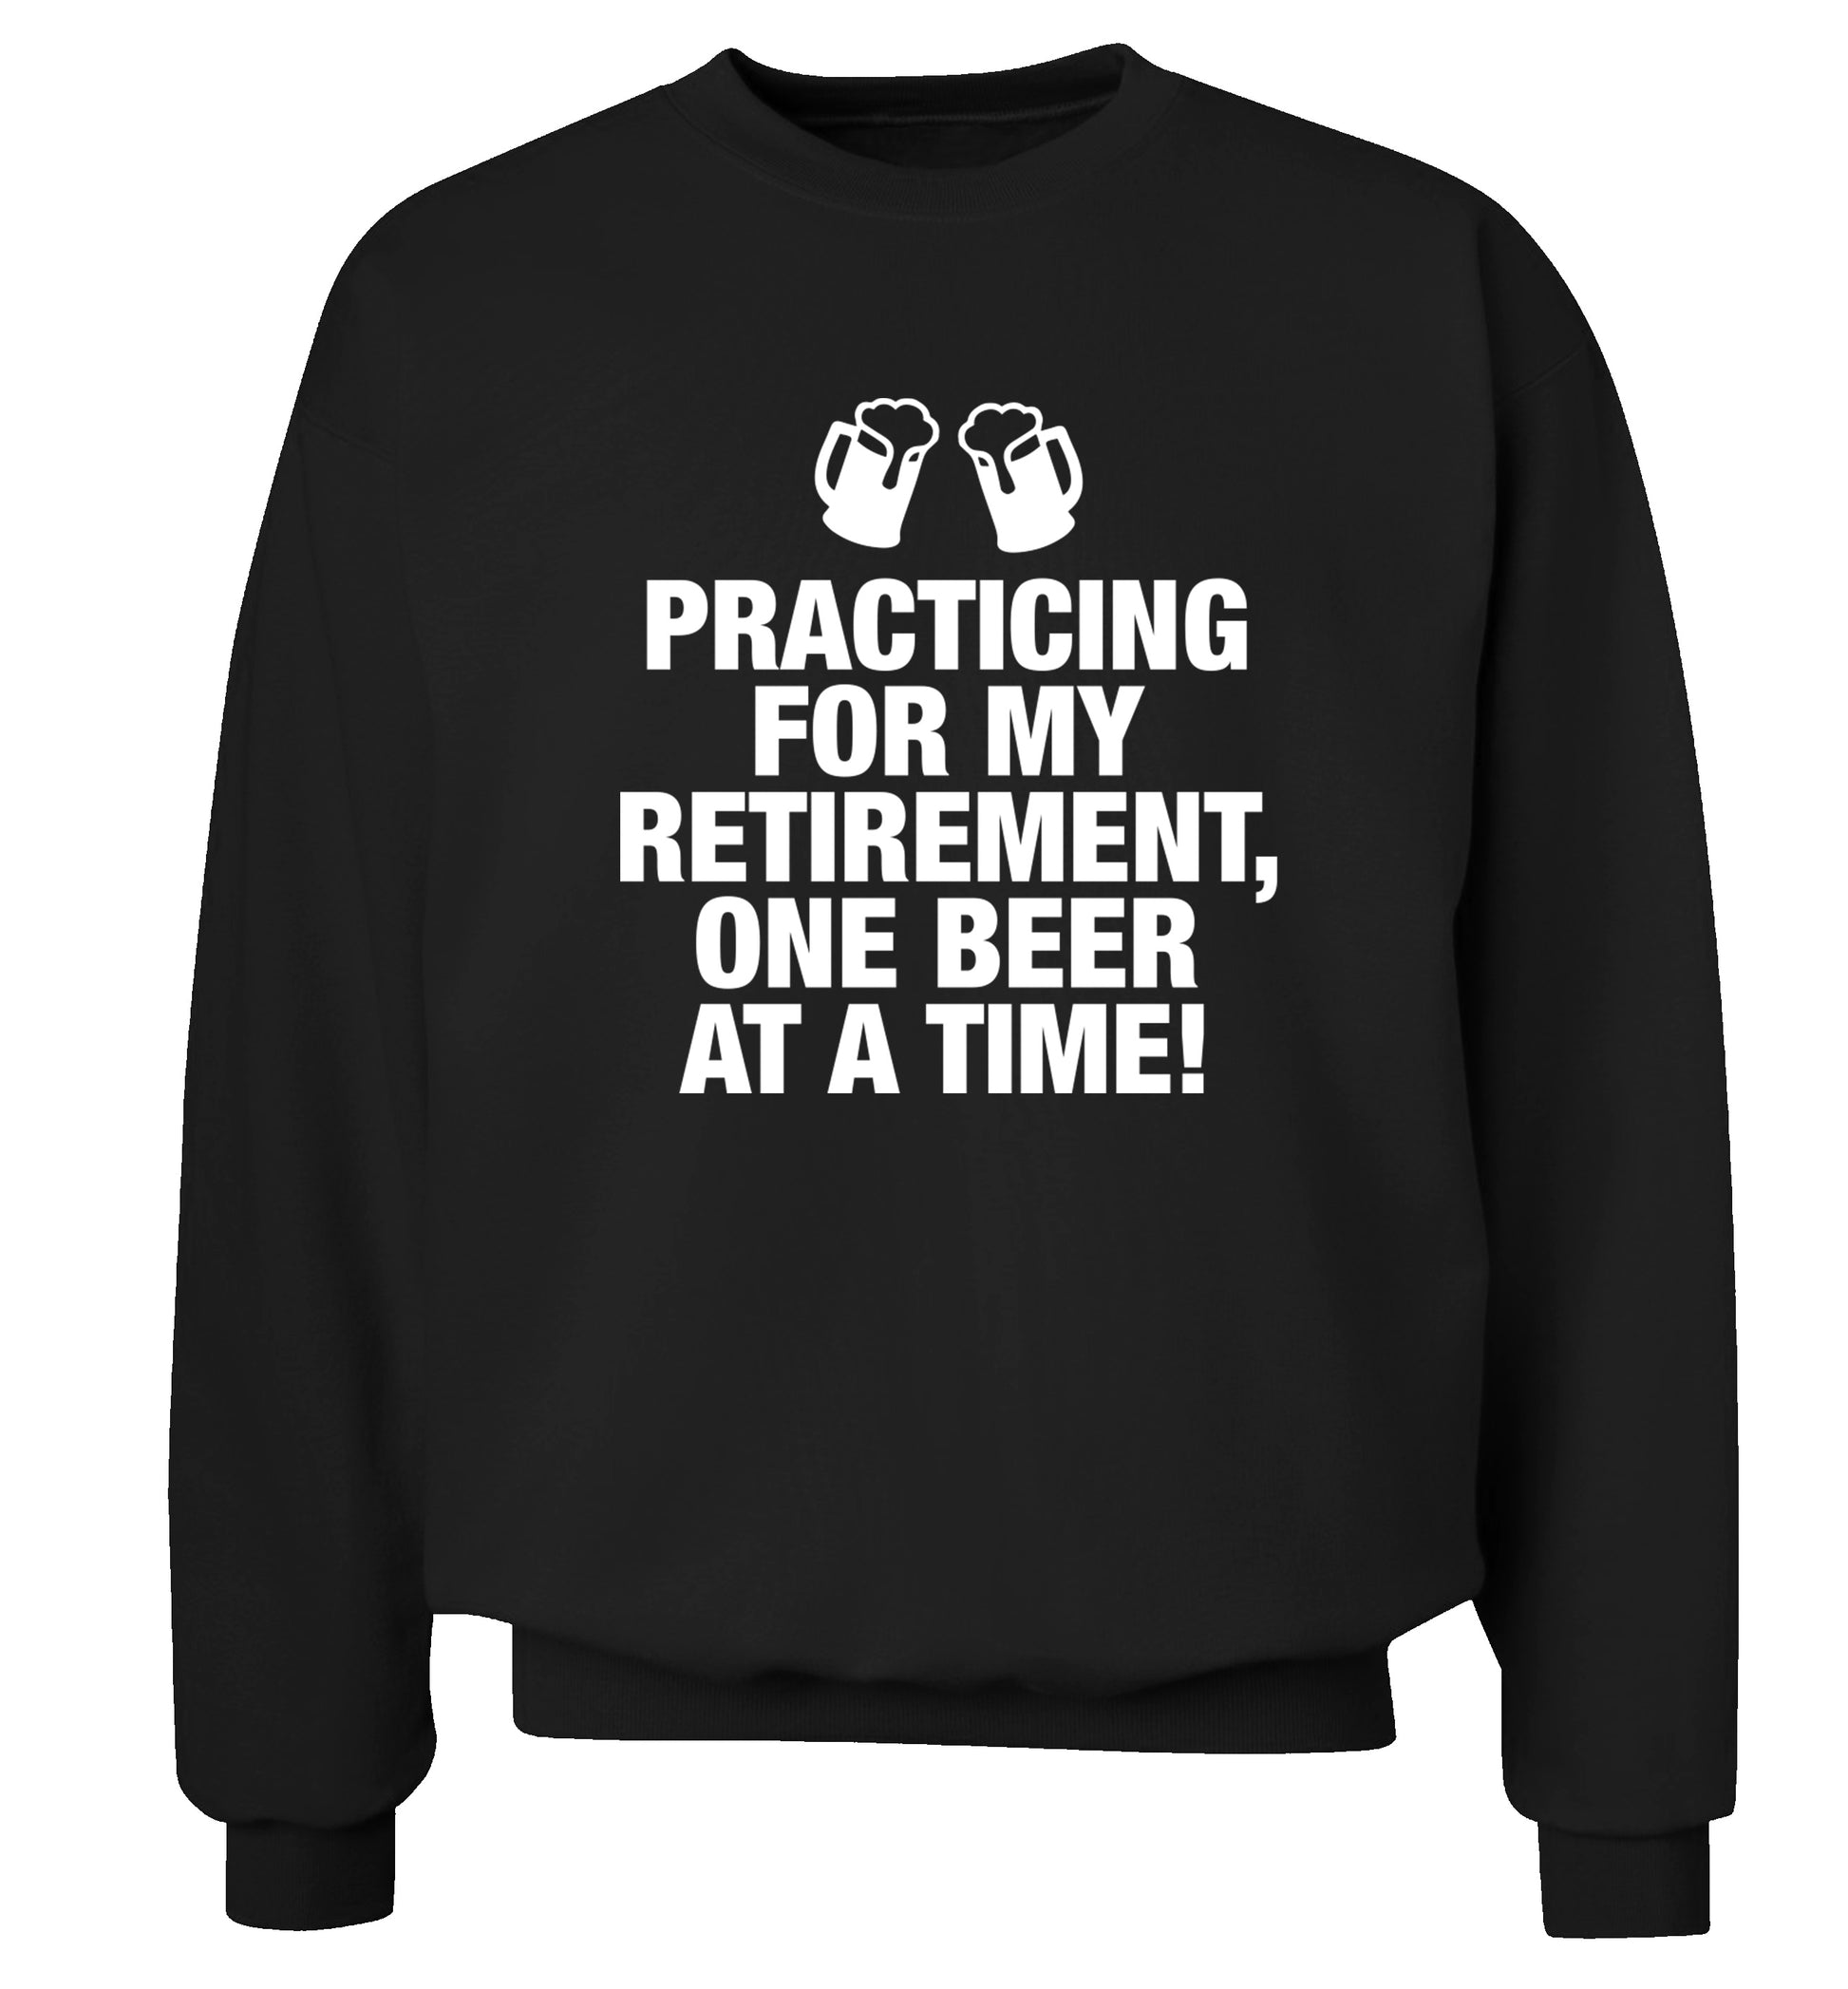 Practicing my retirement one beer at a time Adult's unisex black Sweater 2XL